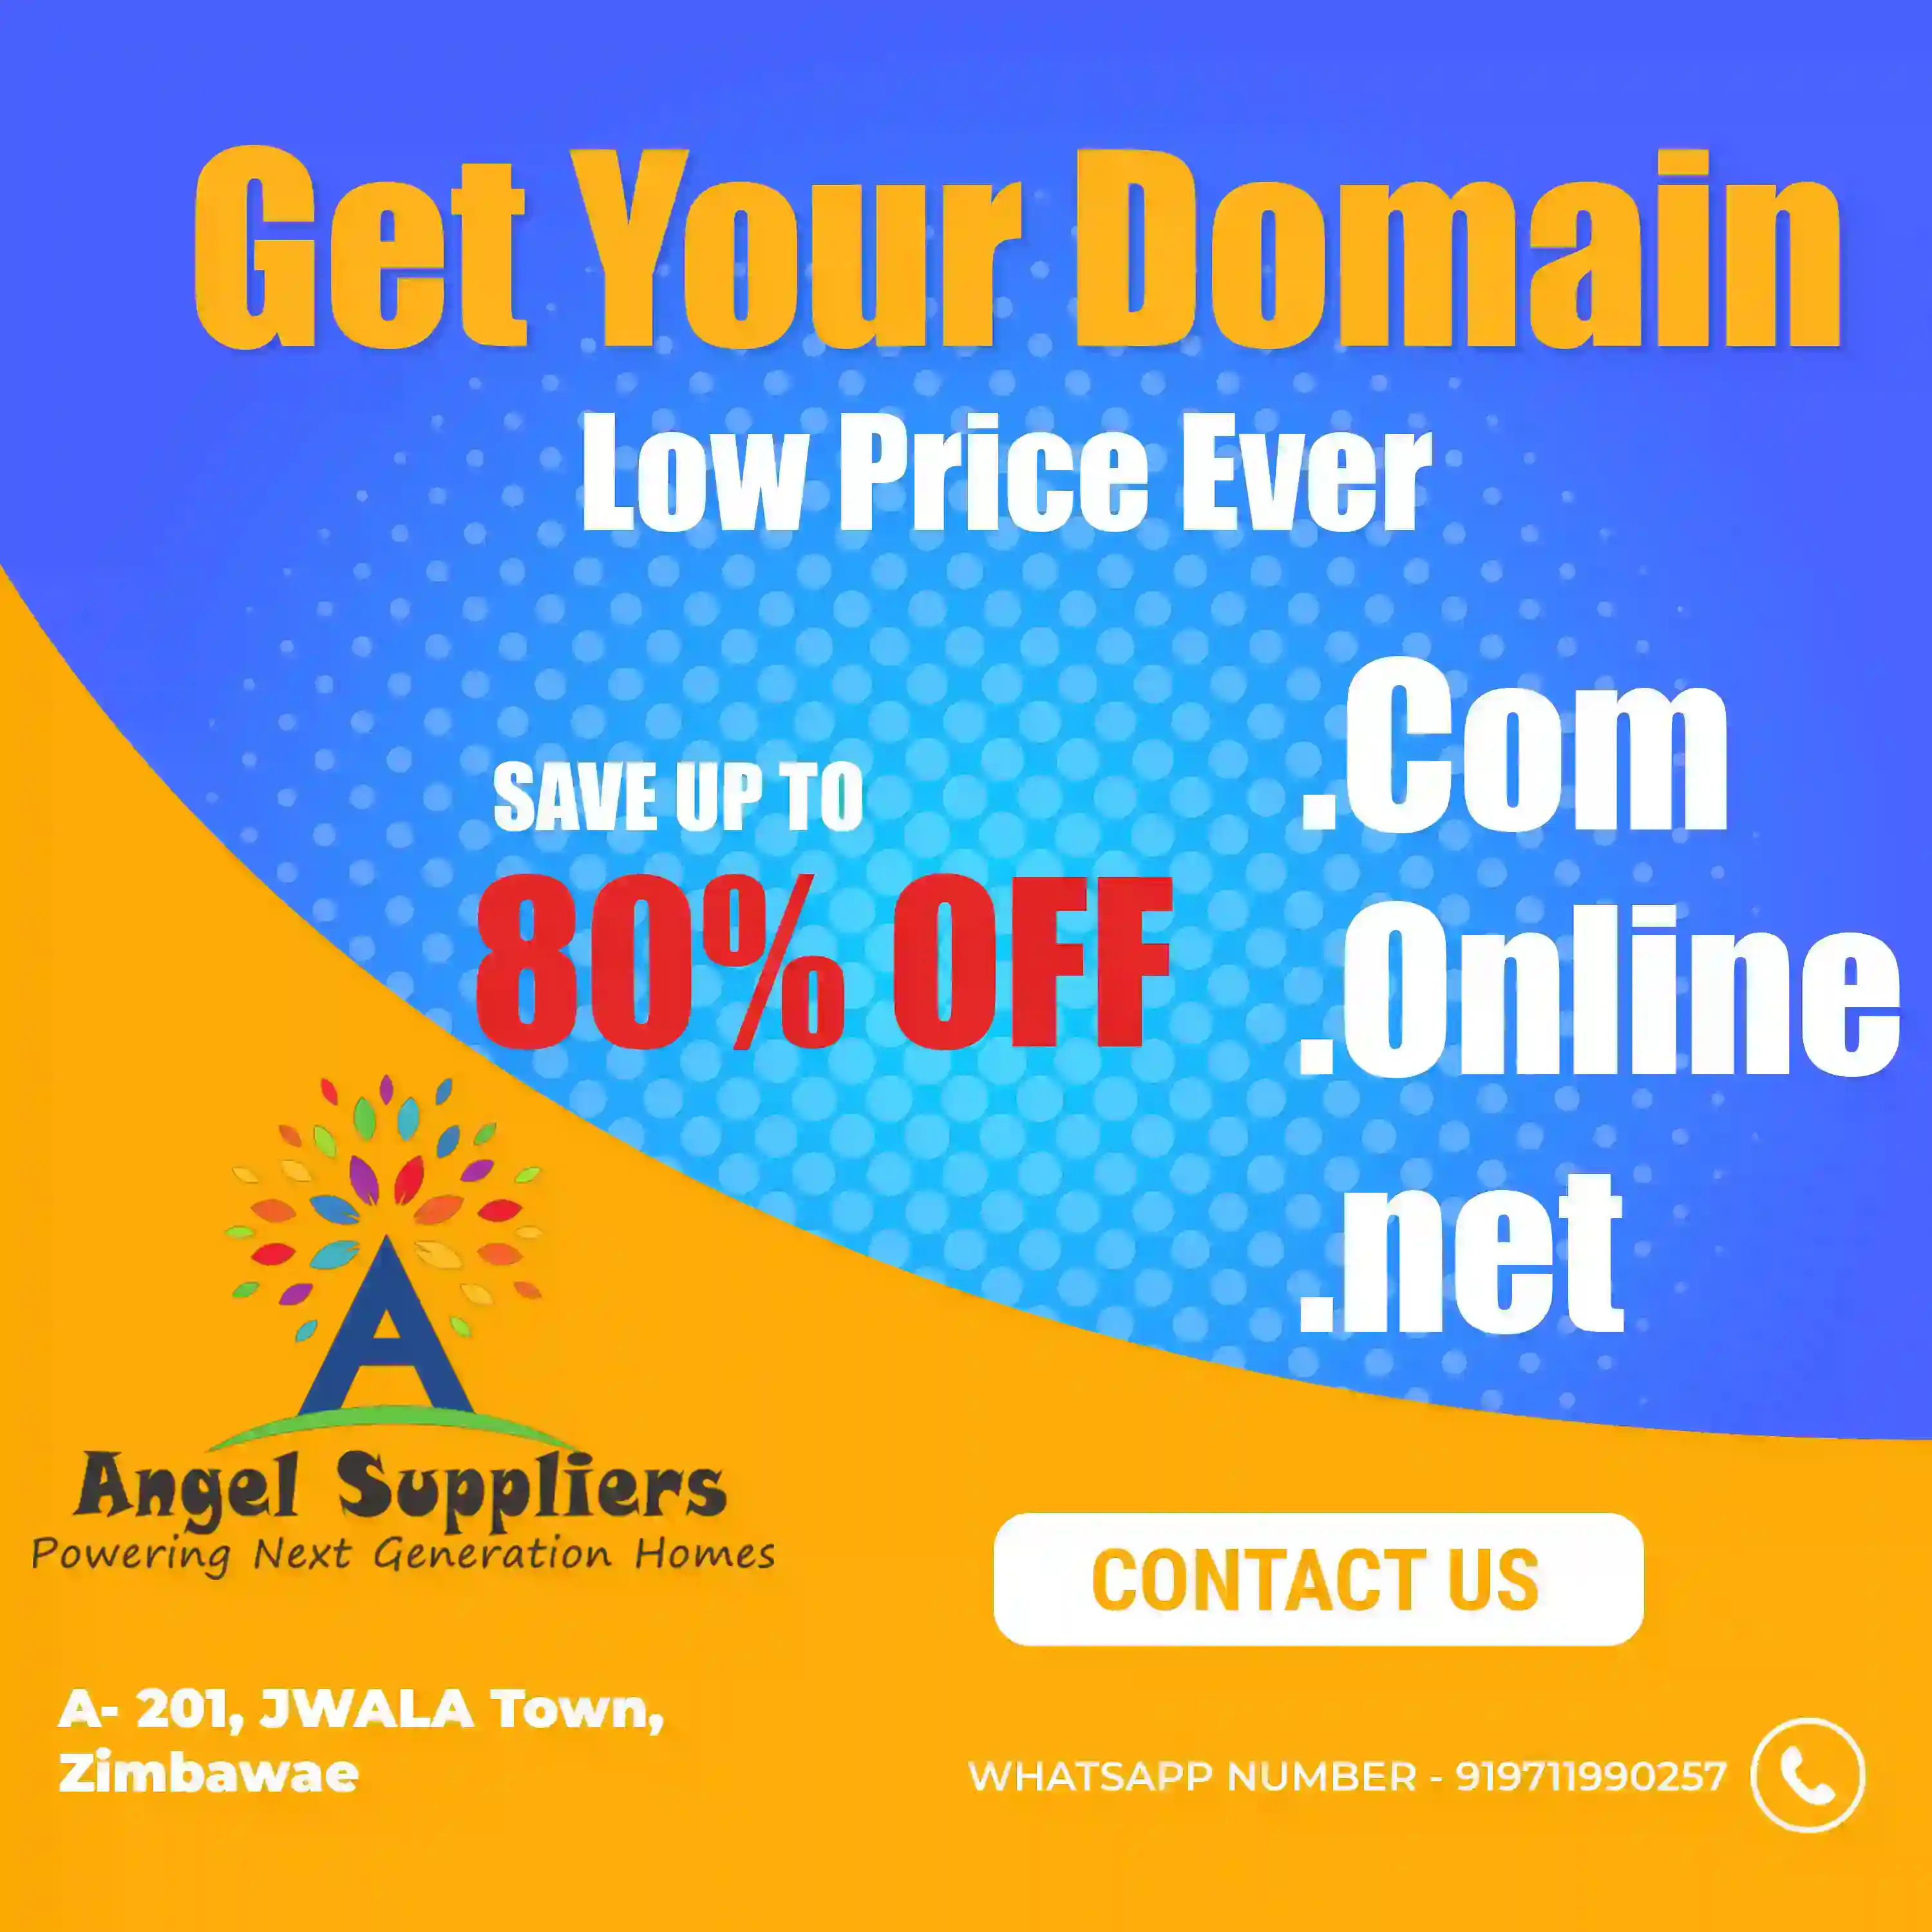 Buy Cheap Domains Limited Time Offer